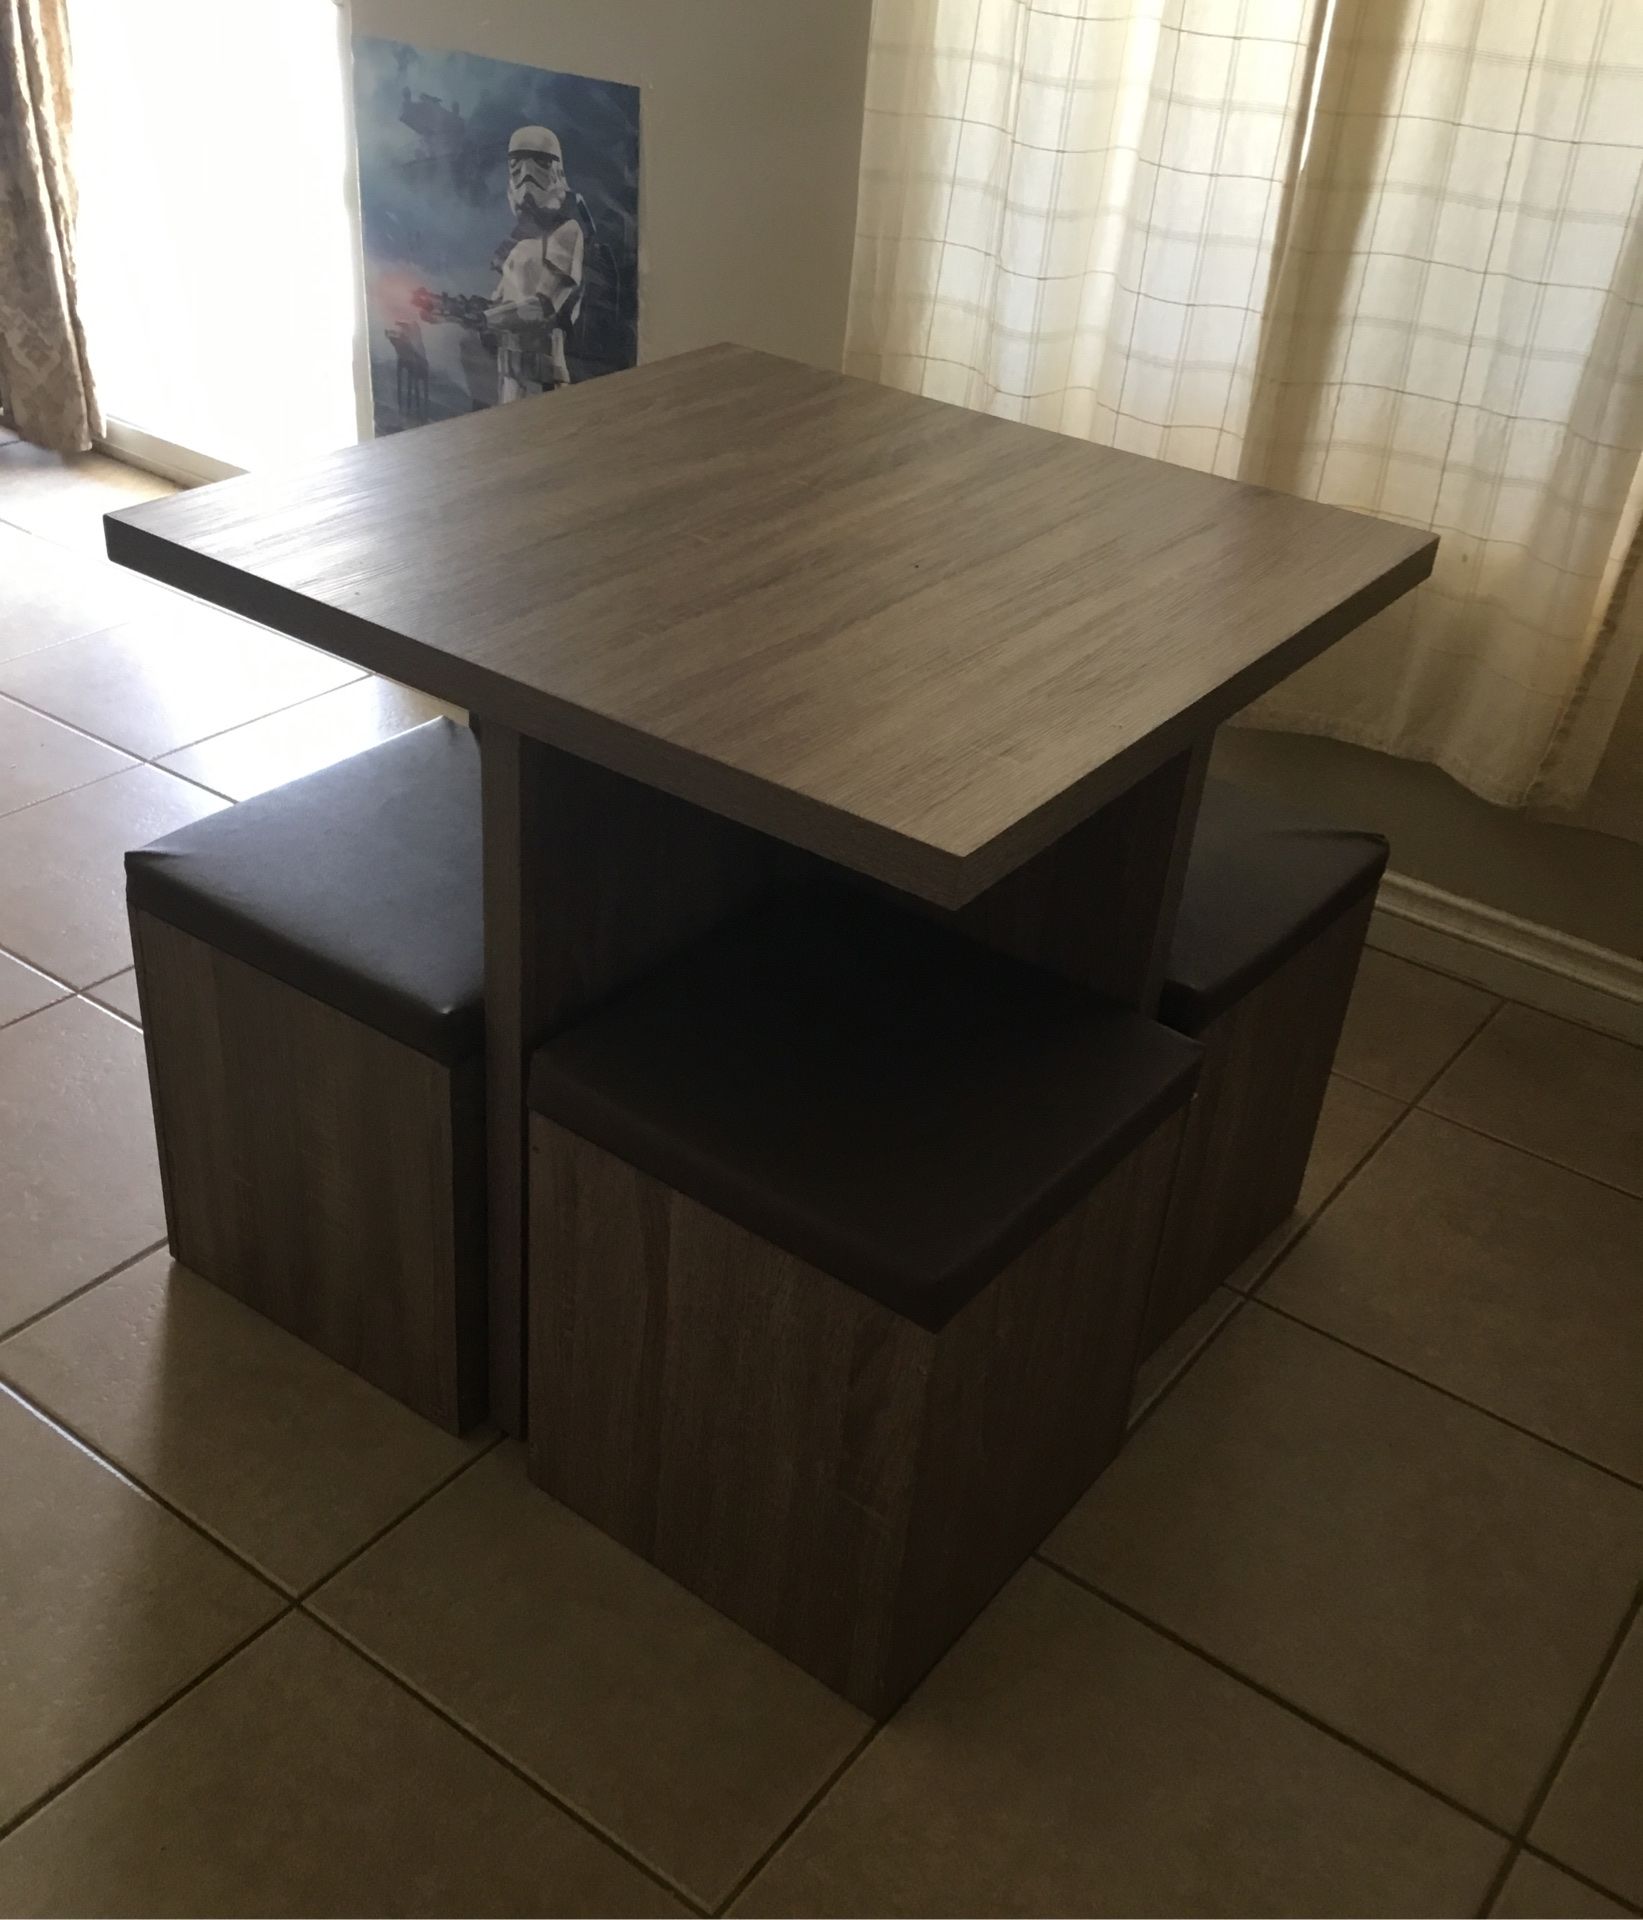 4 PERSON SMALL KITCHEN OR PLAY TABLE